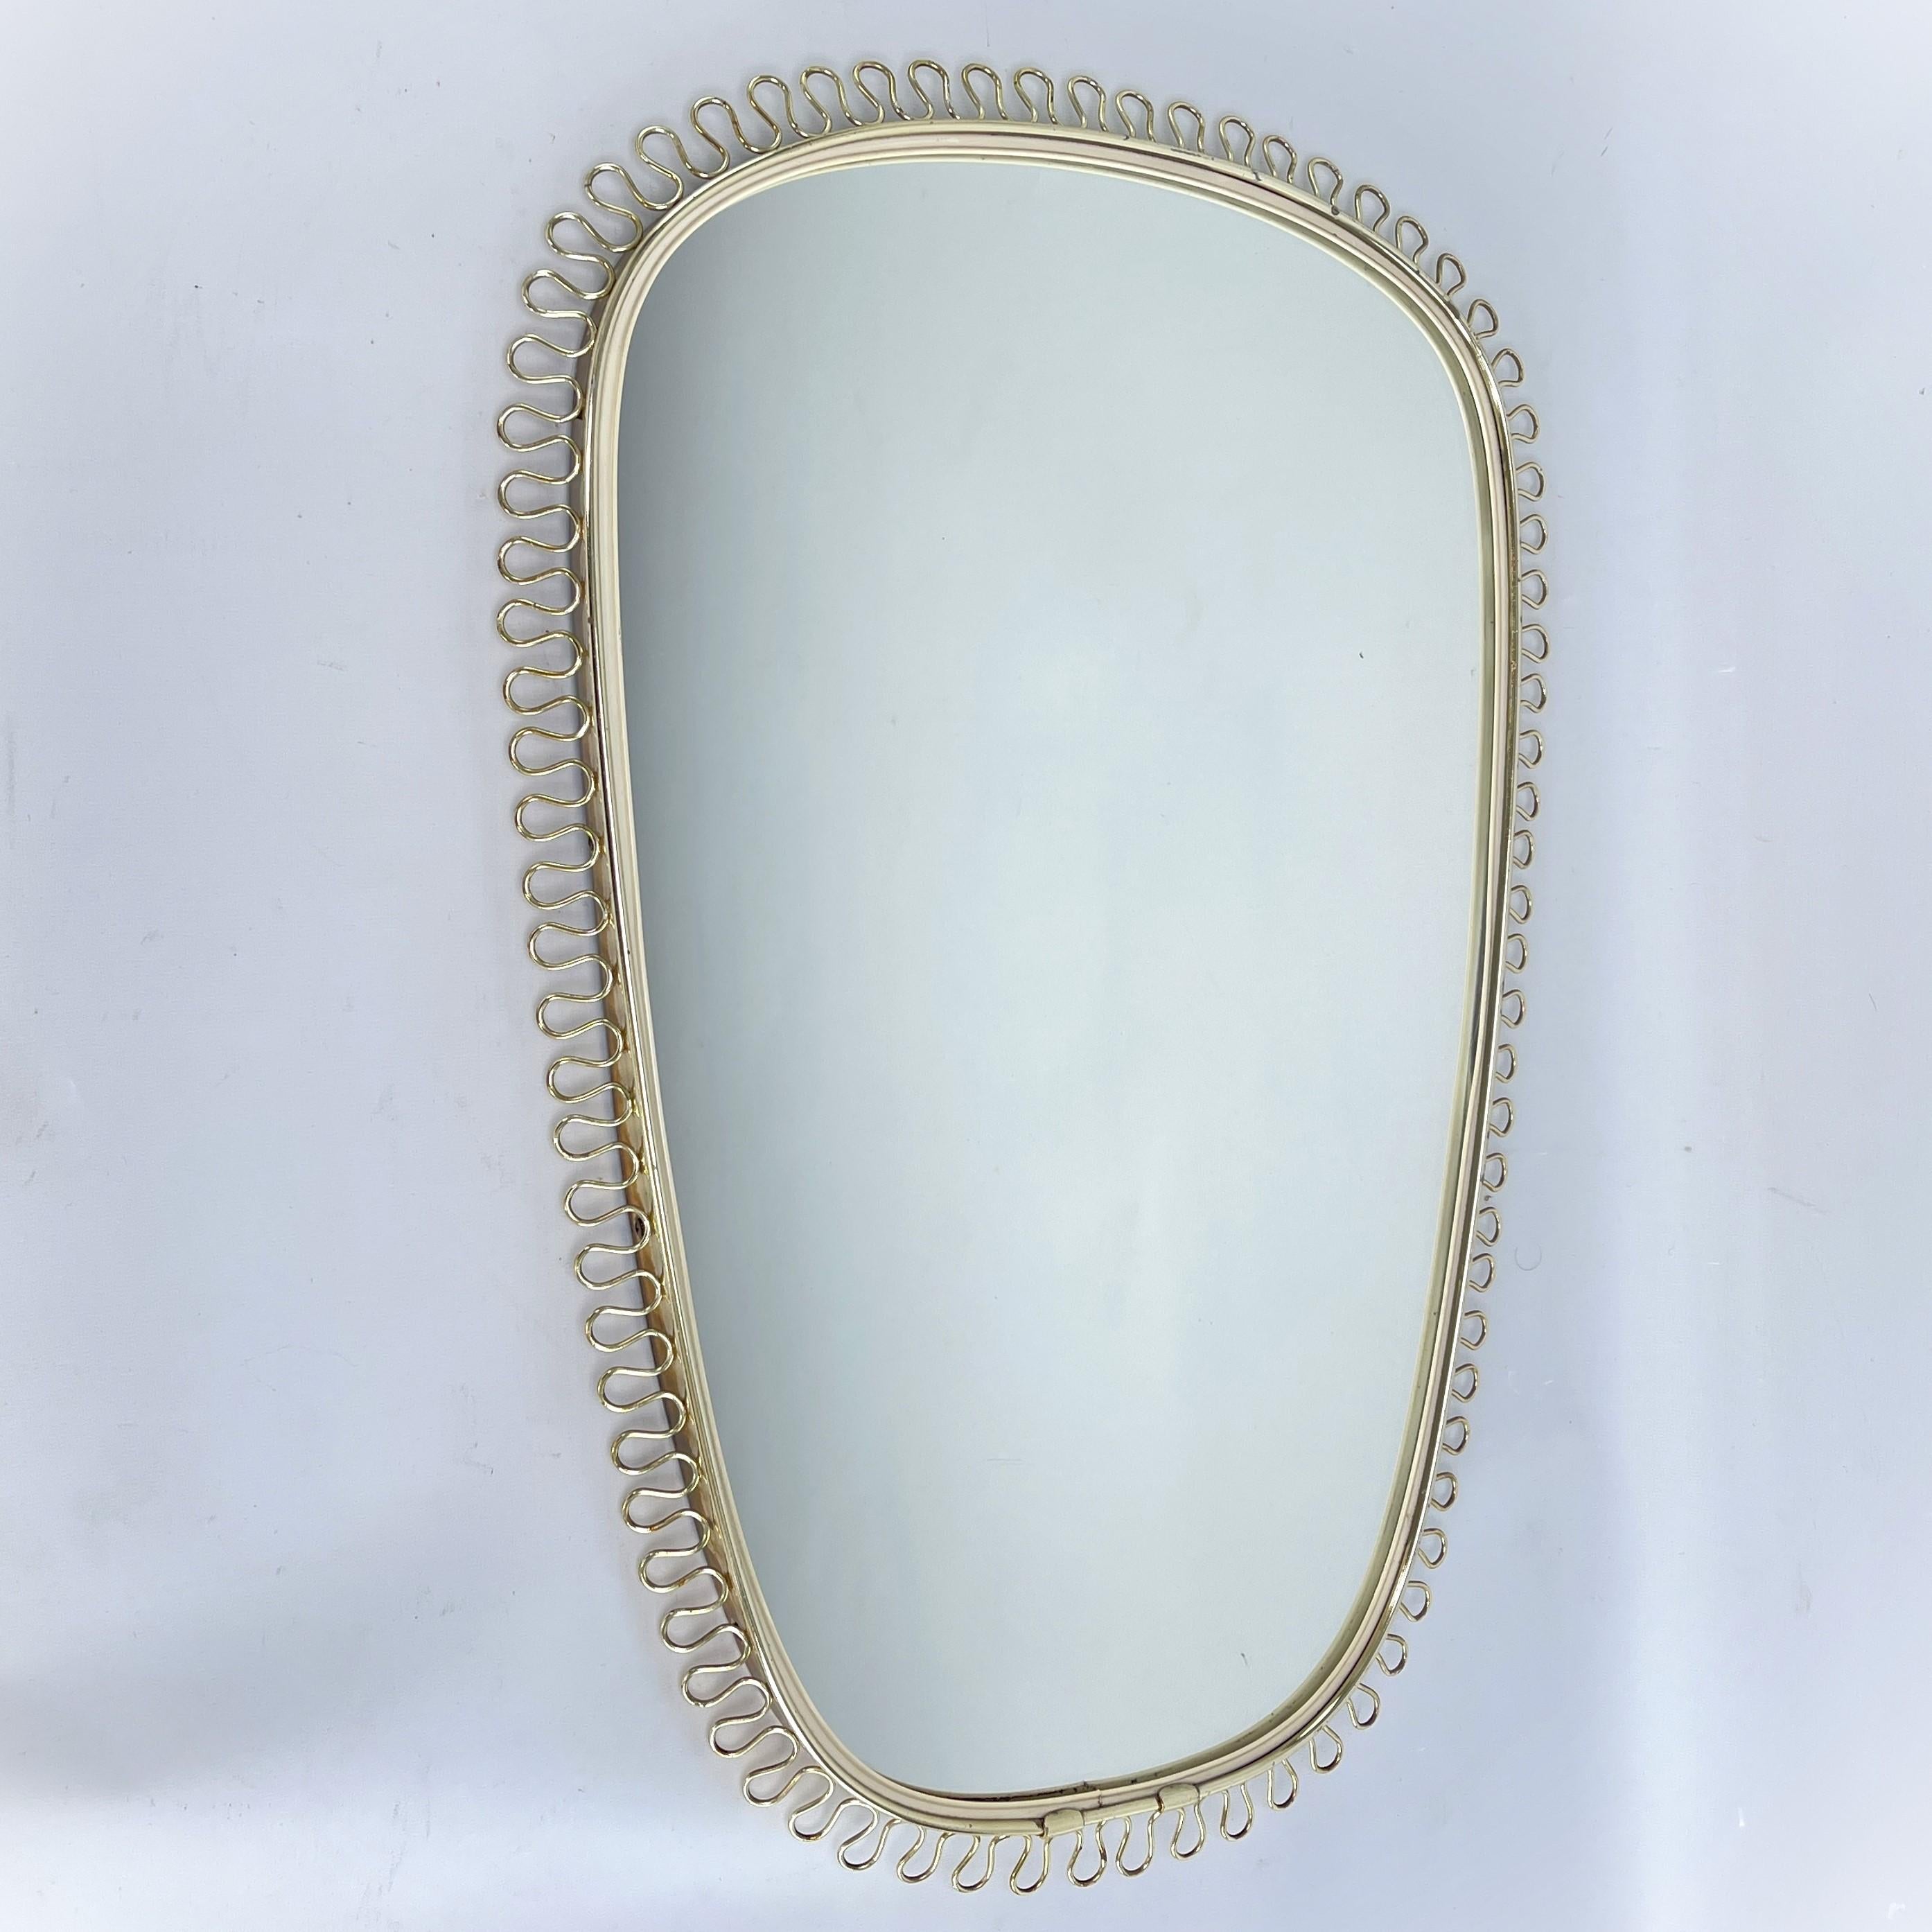 Wall Mirror by Josef Frank - 1950s

The designer of this extraordinary object succeeded in combining functionality, design, style and aesthetics. Even today, this convex mirror is an absolute eye-catcher. The mirror was manufactured from 